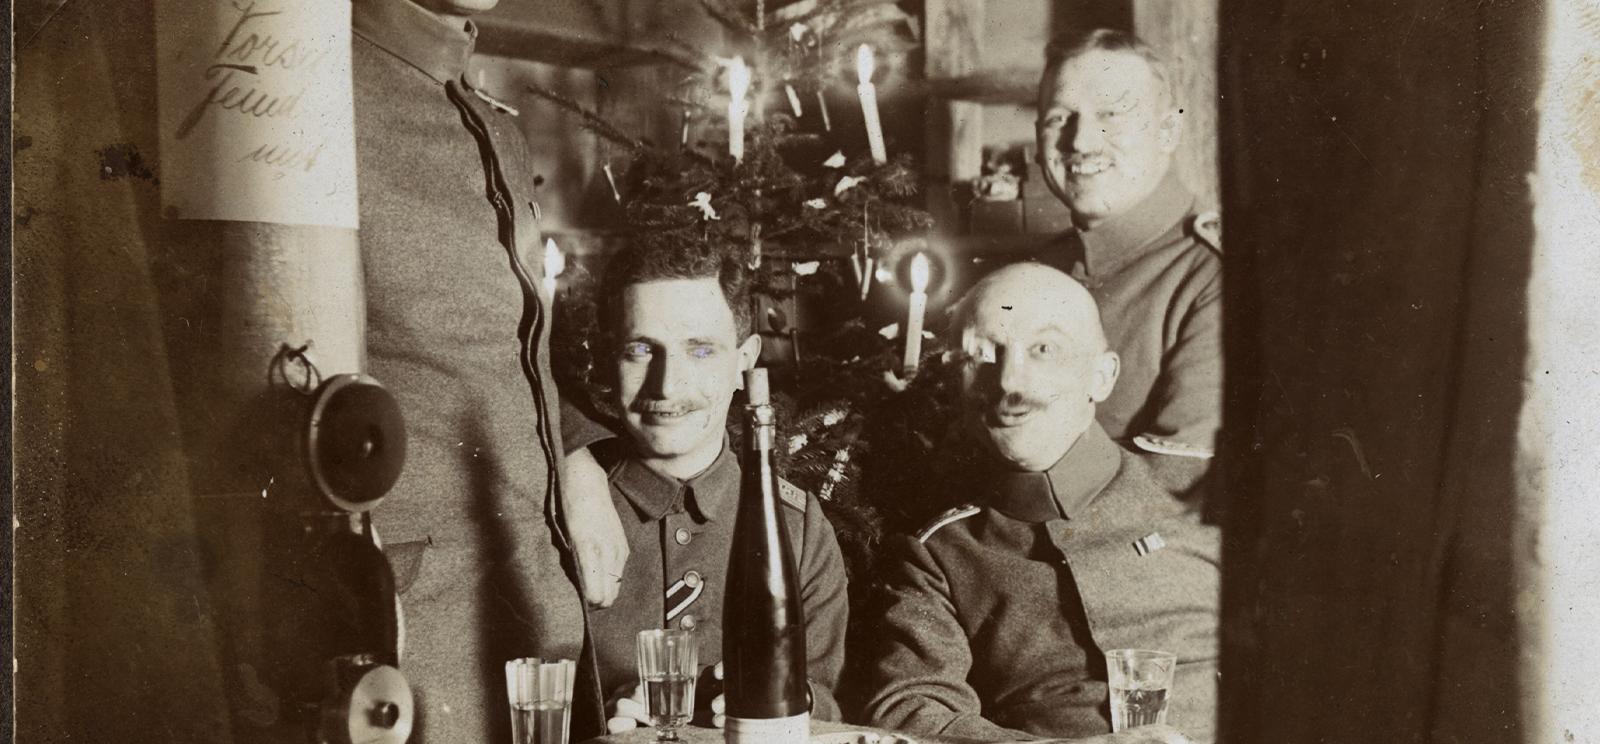 Black and white photograph of several WWI soldiers sitting in front of a Christmas tree with smiles on their faces and drinks on the table